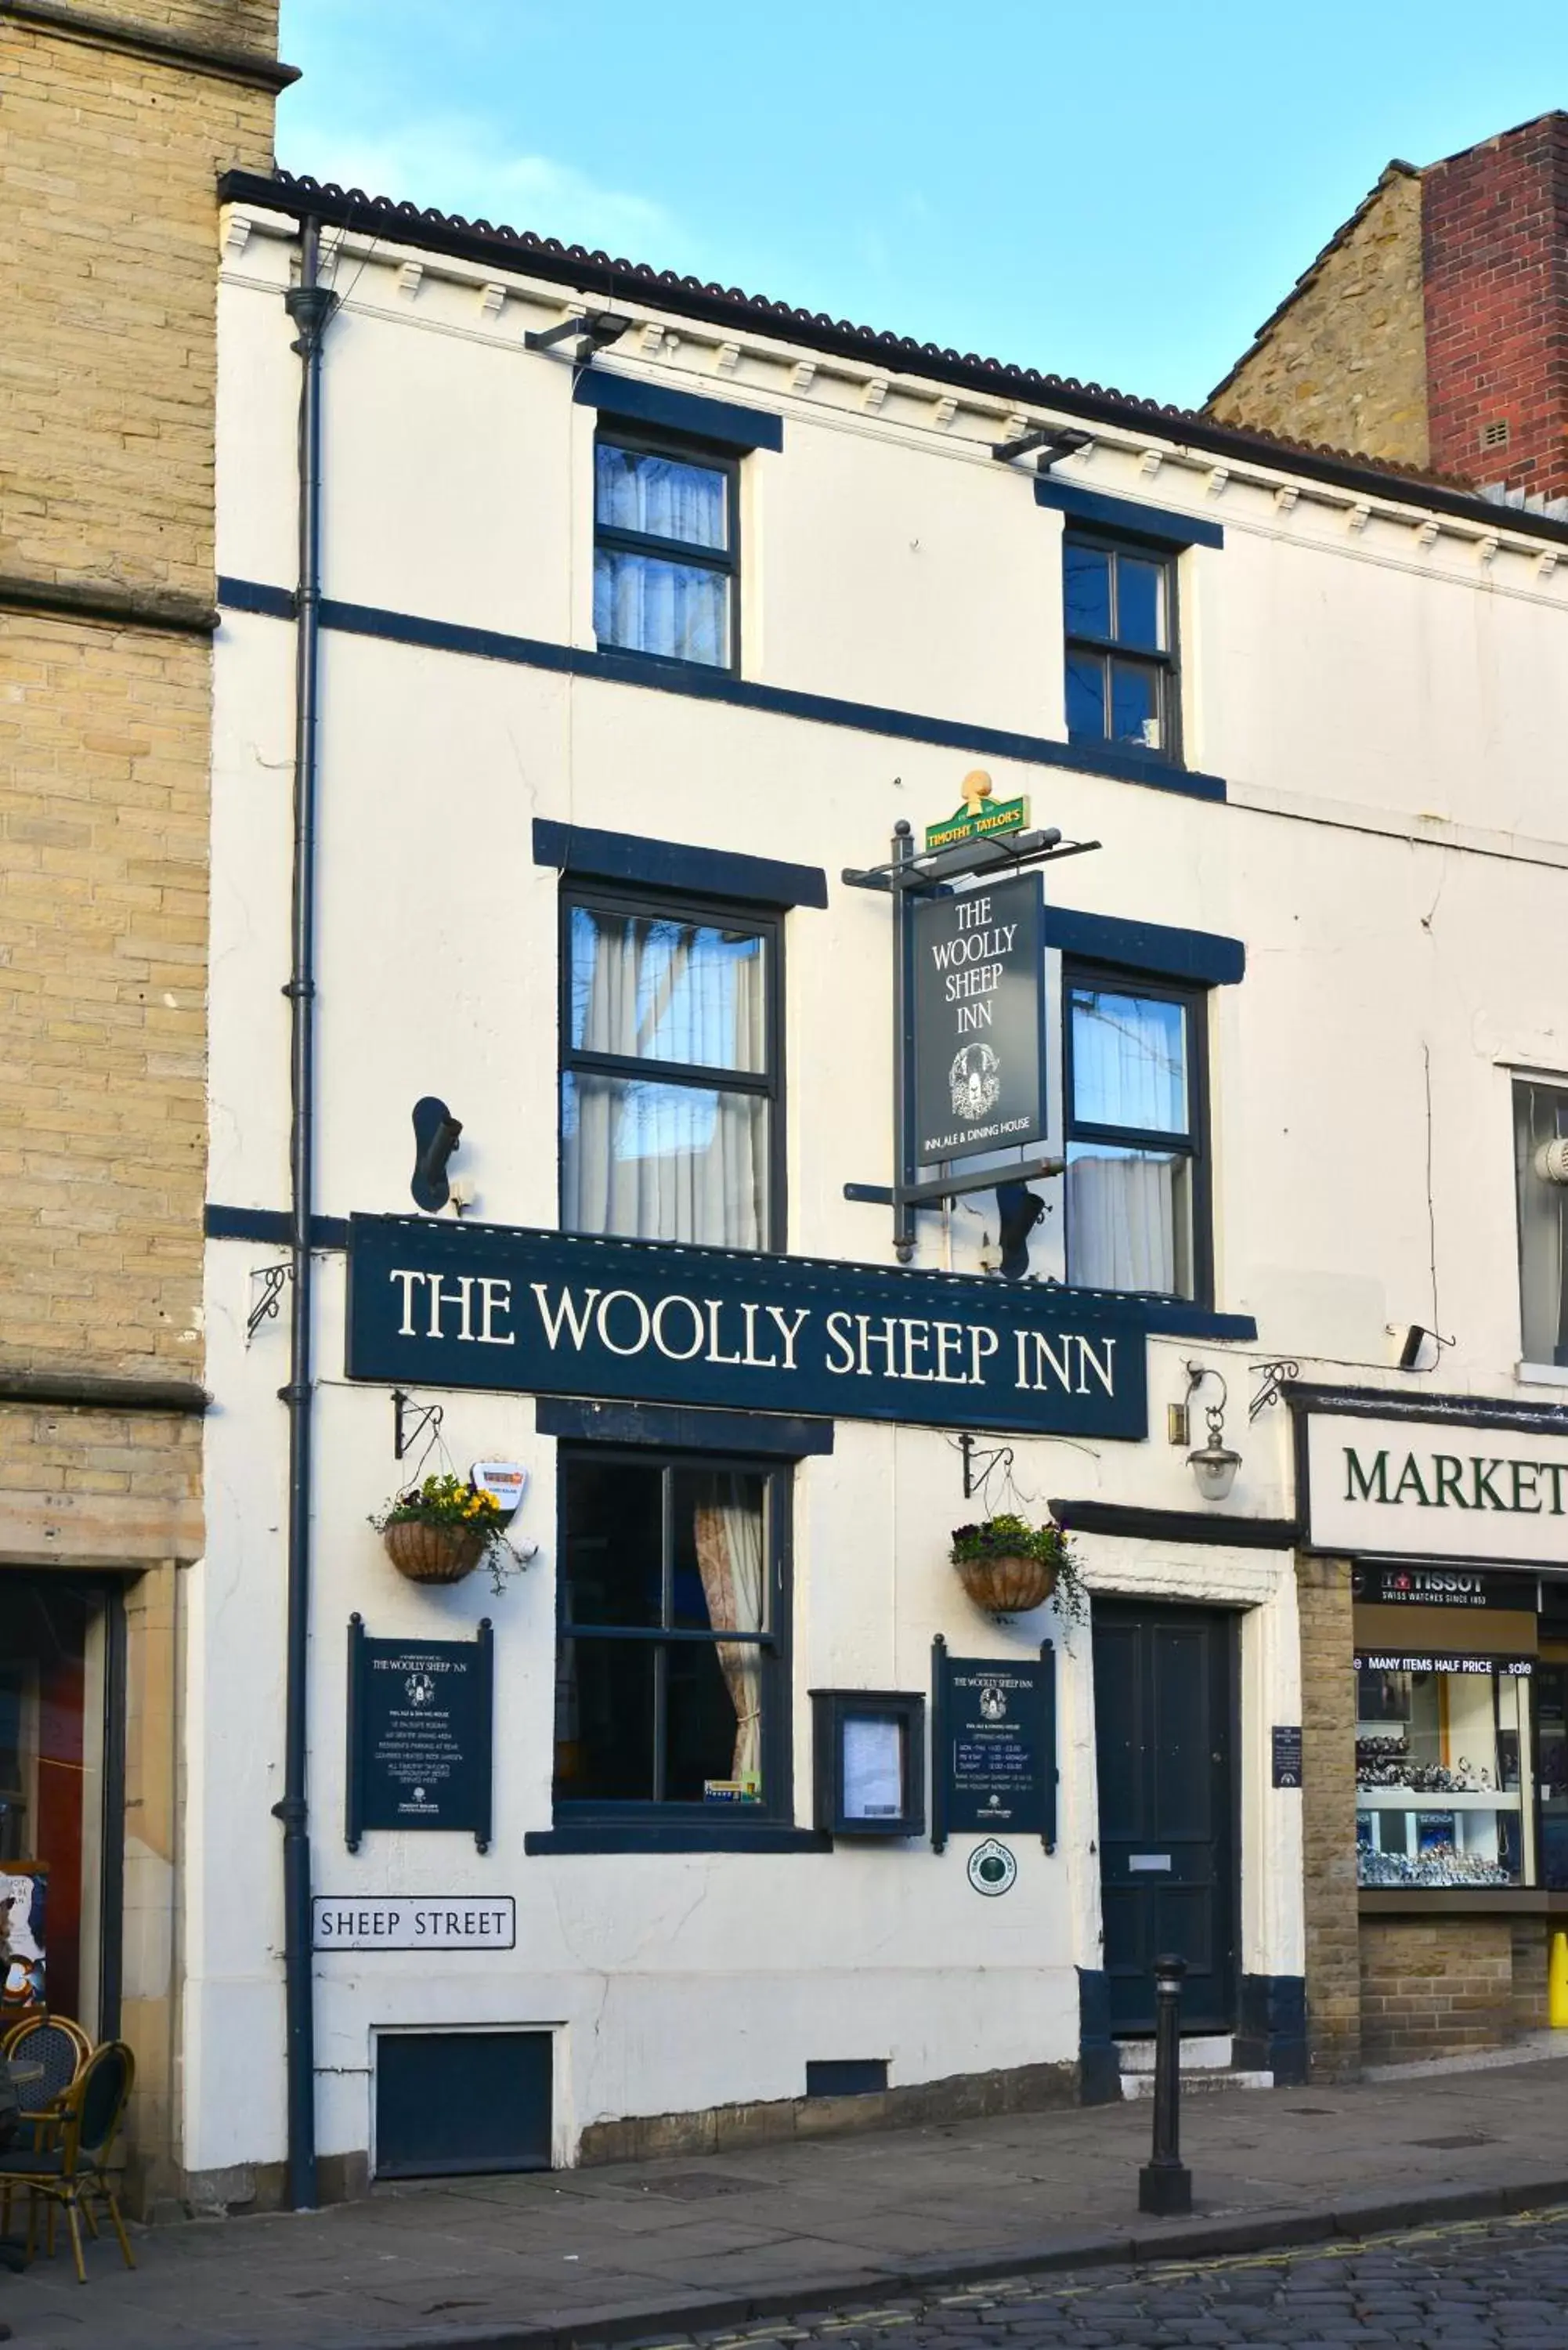 Property Building in The Woolly Sheep Inn